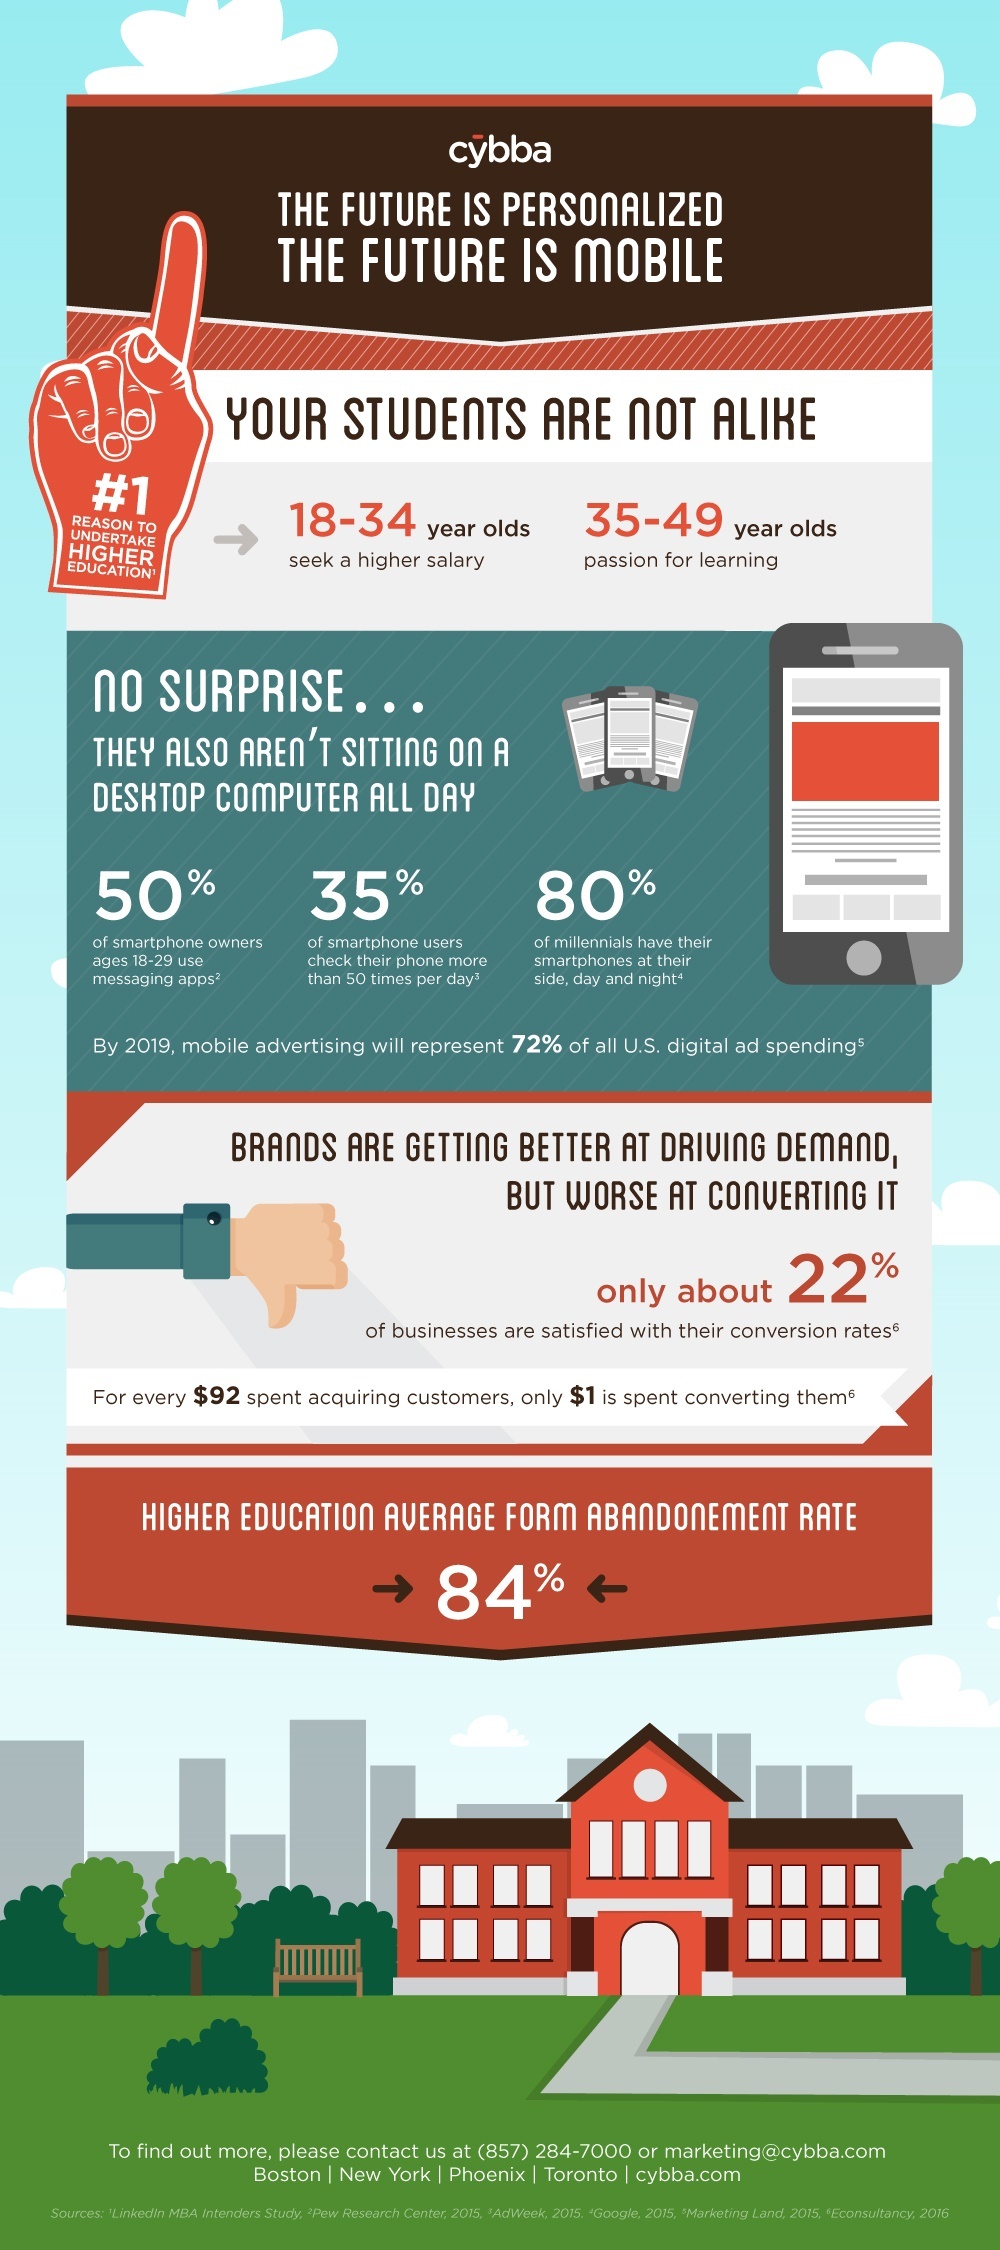 HigherEd_Infographic_R1